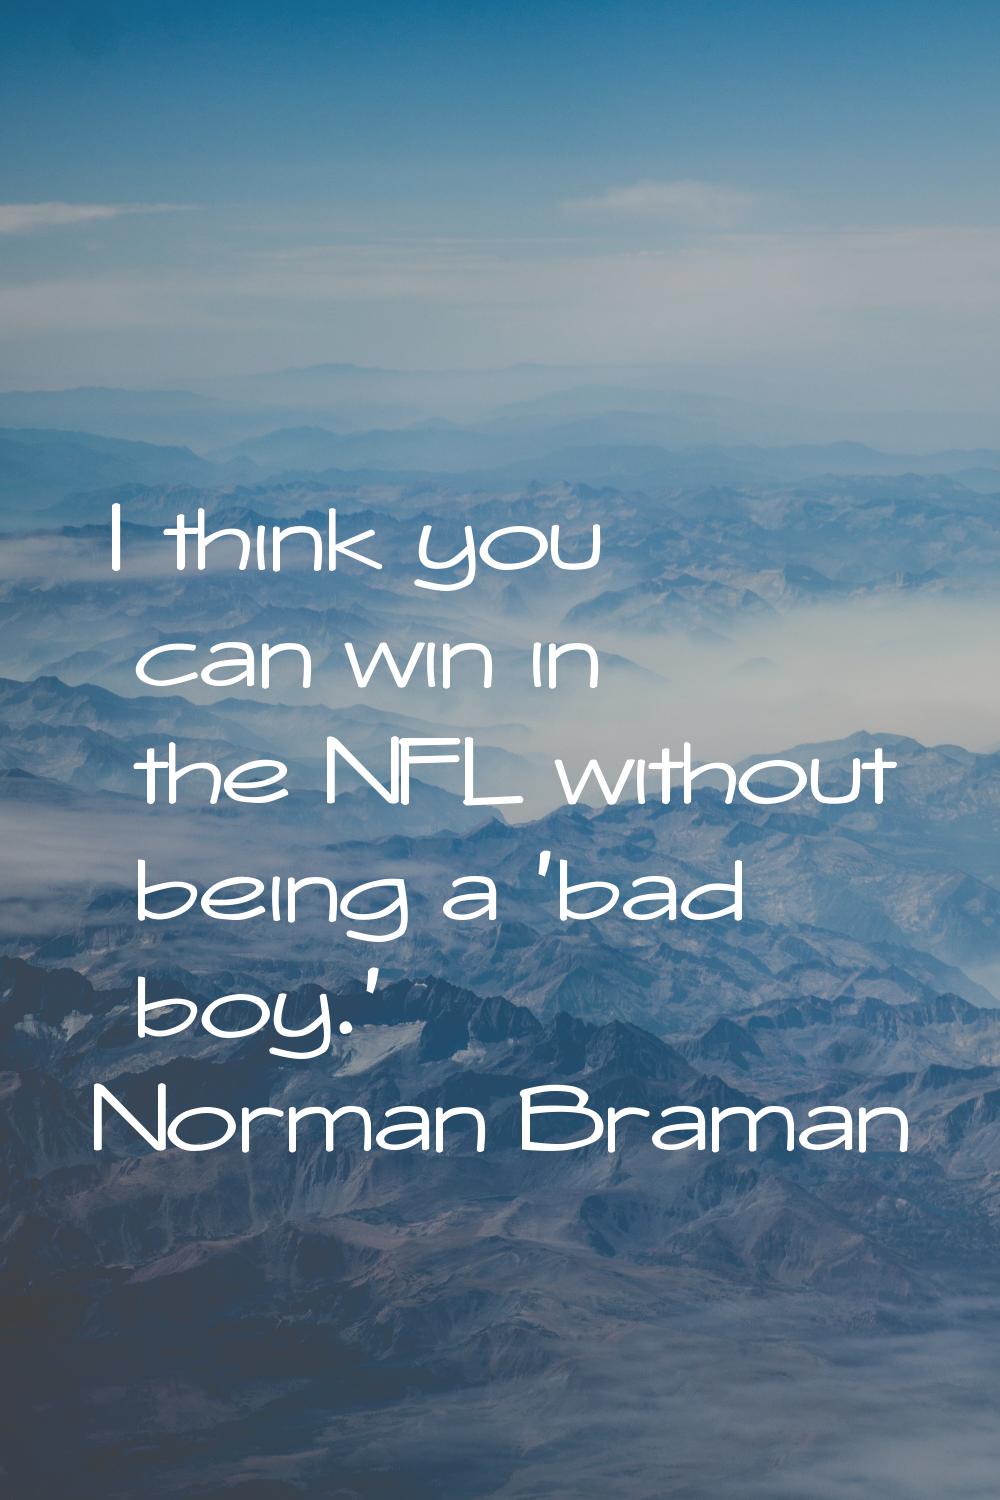 I think you can win in the NFL without being a 'bad boy.'